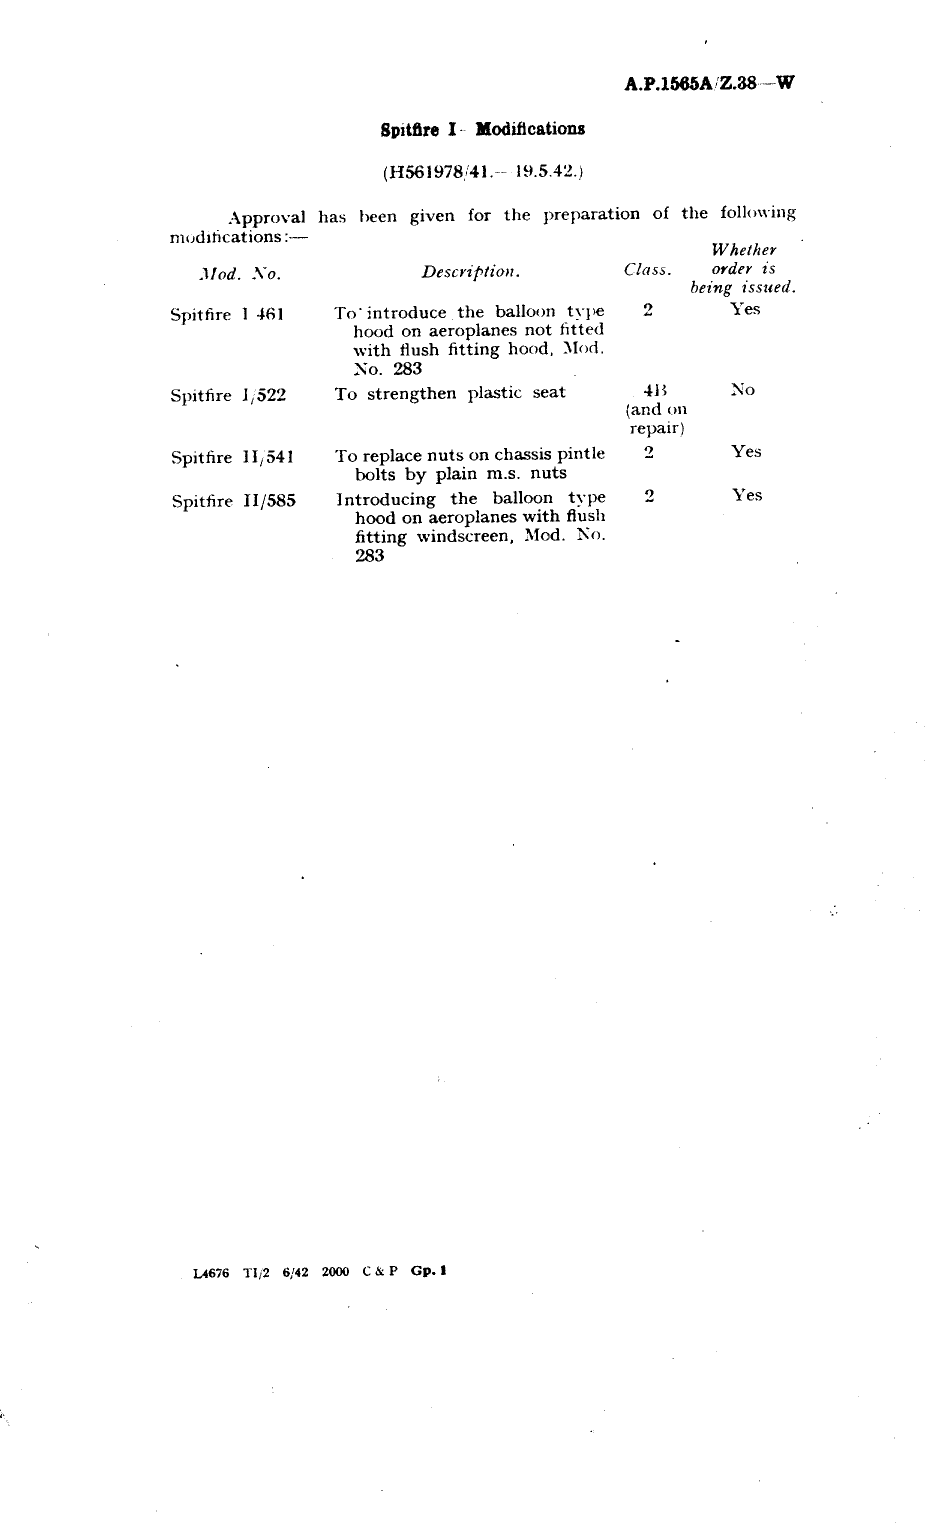 Sample page 1 from AirCorps Library document: Spitfire I Modifications 461, 522, 541 and 585